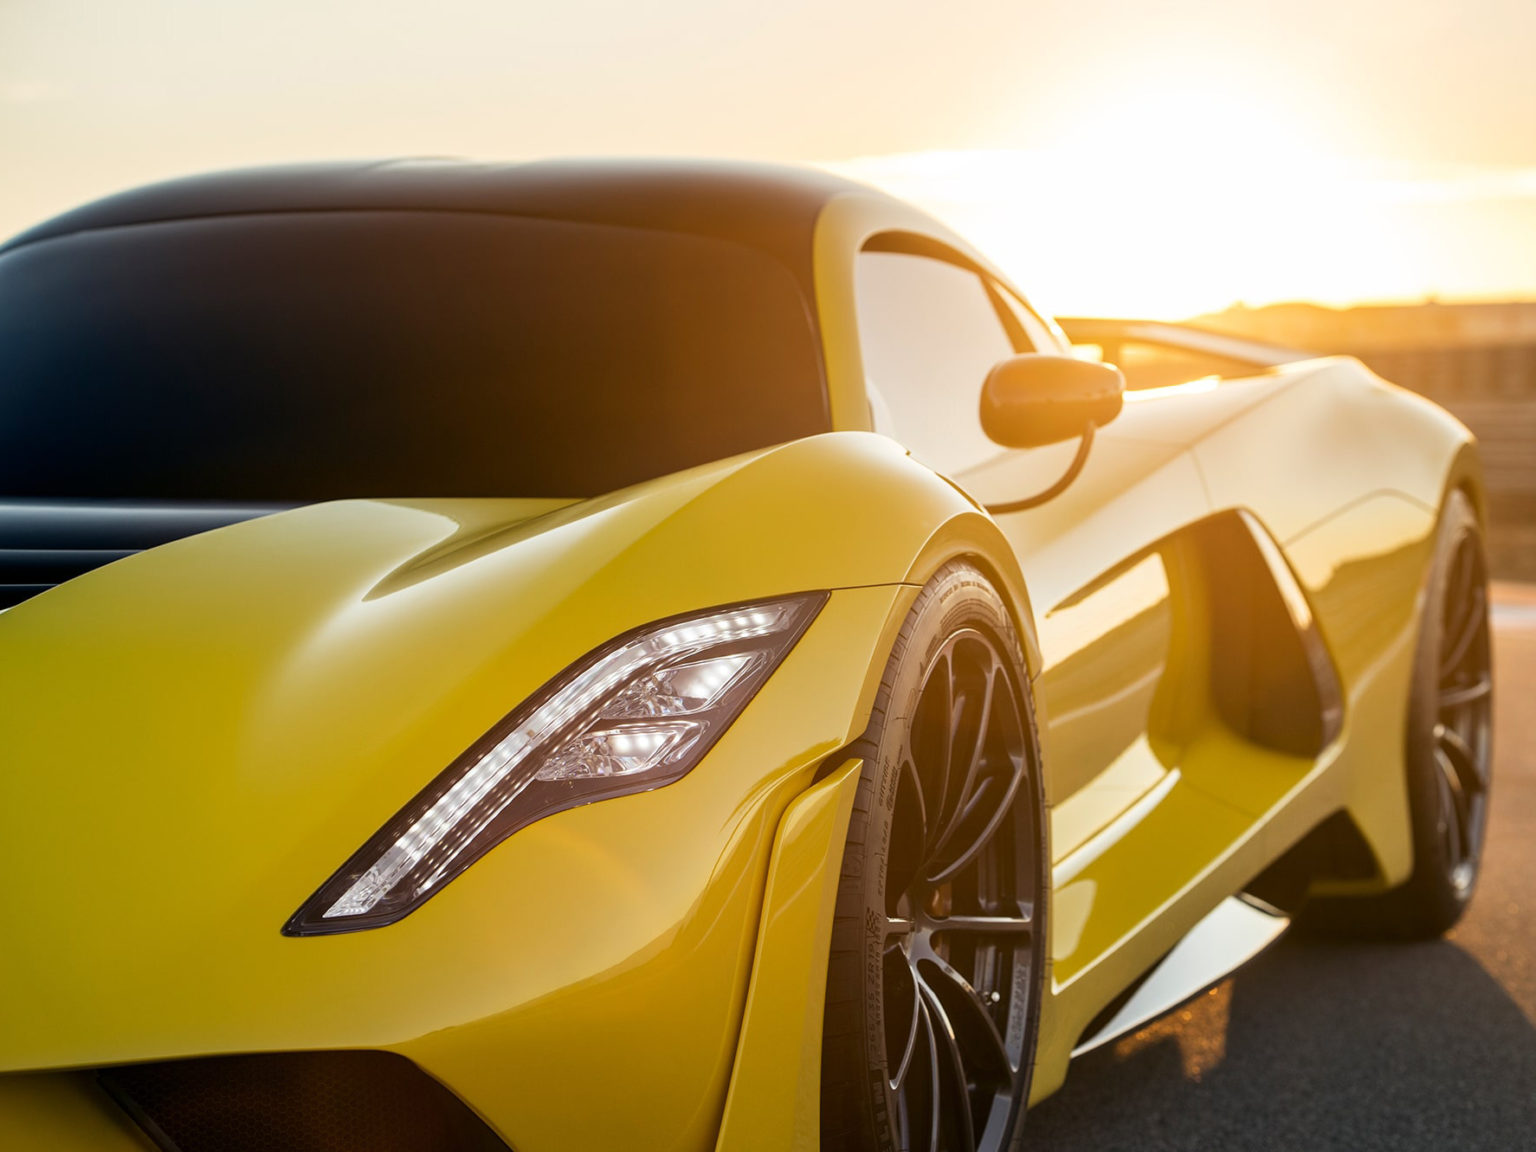 The Hennessey Venom F5 is coming in 2021.